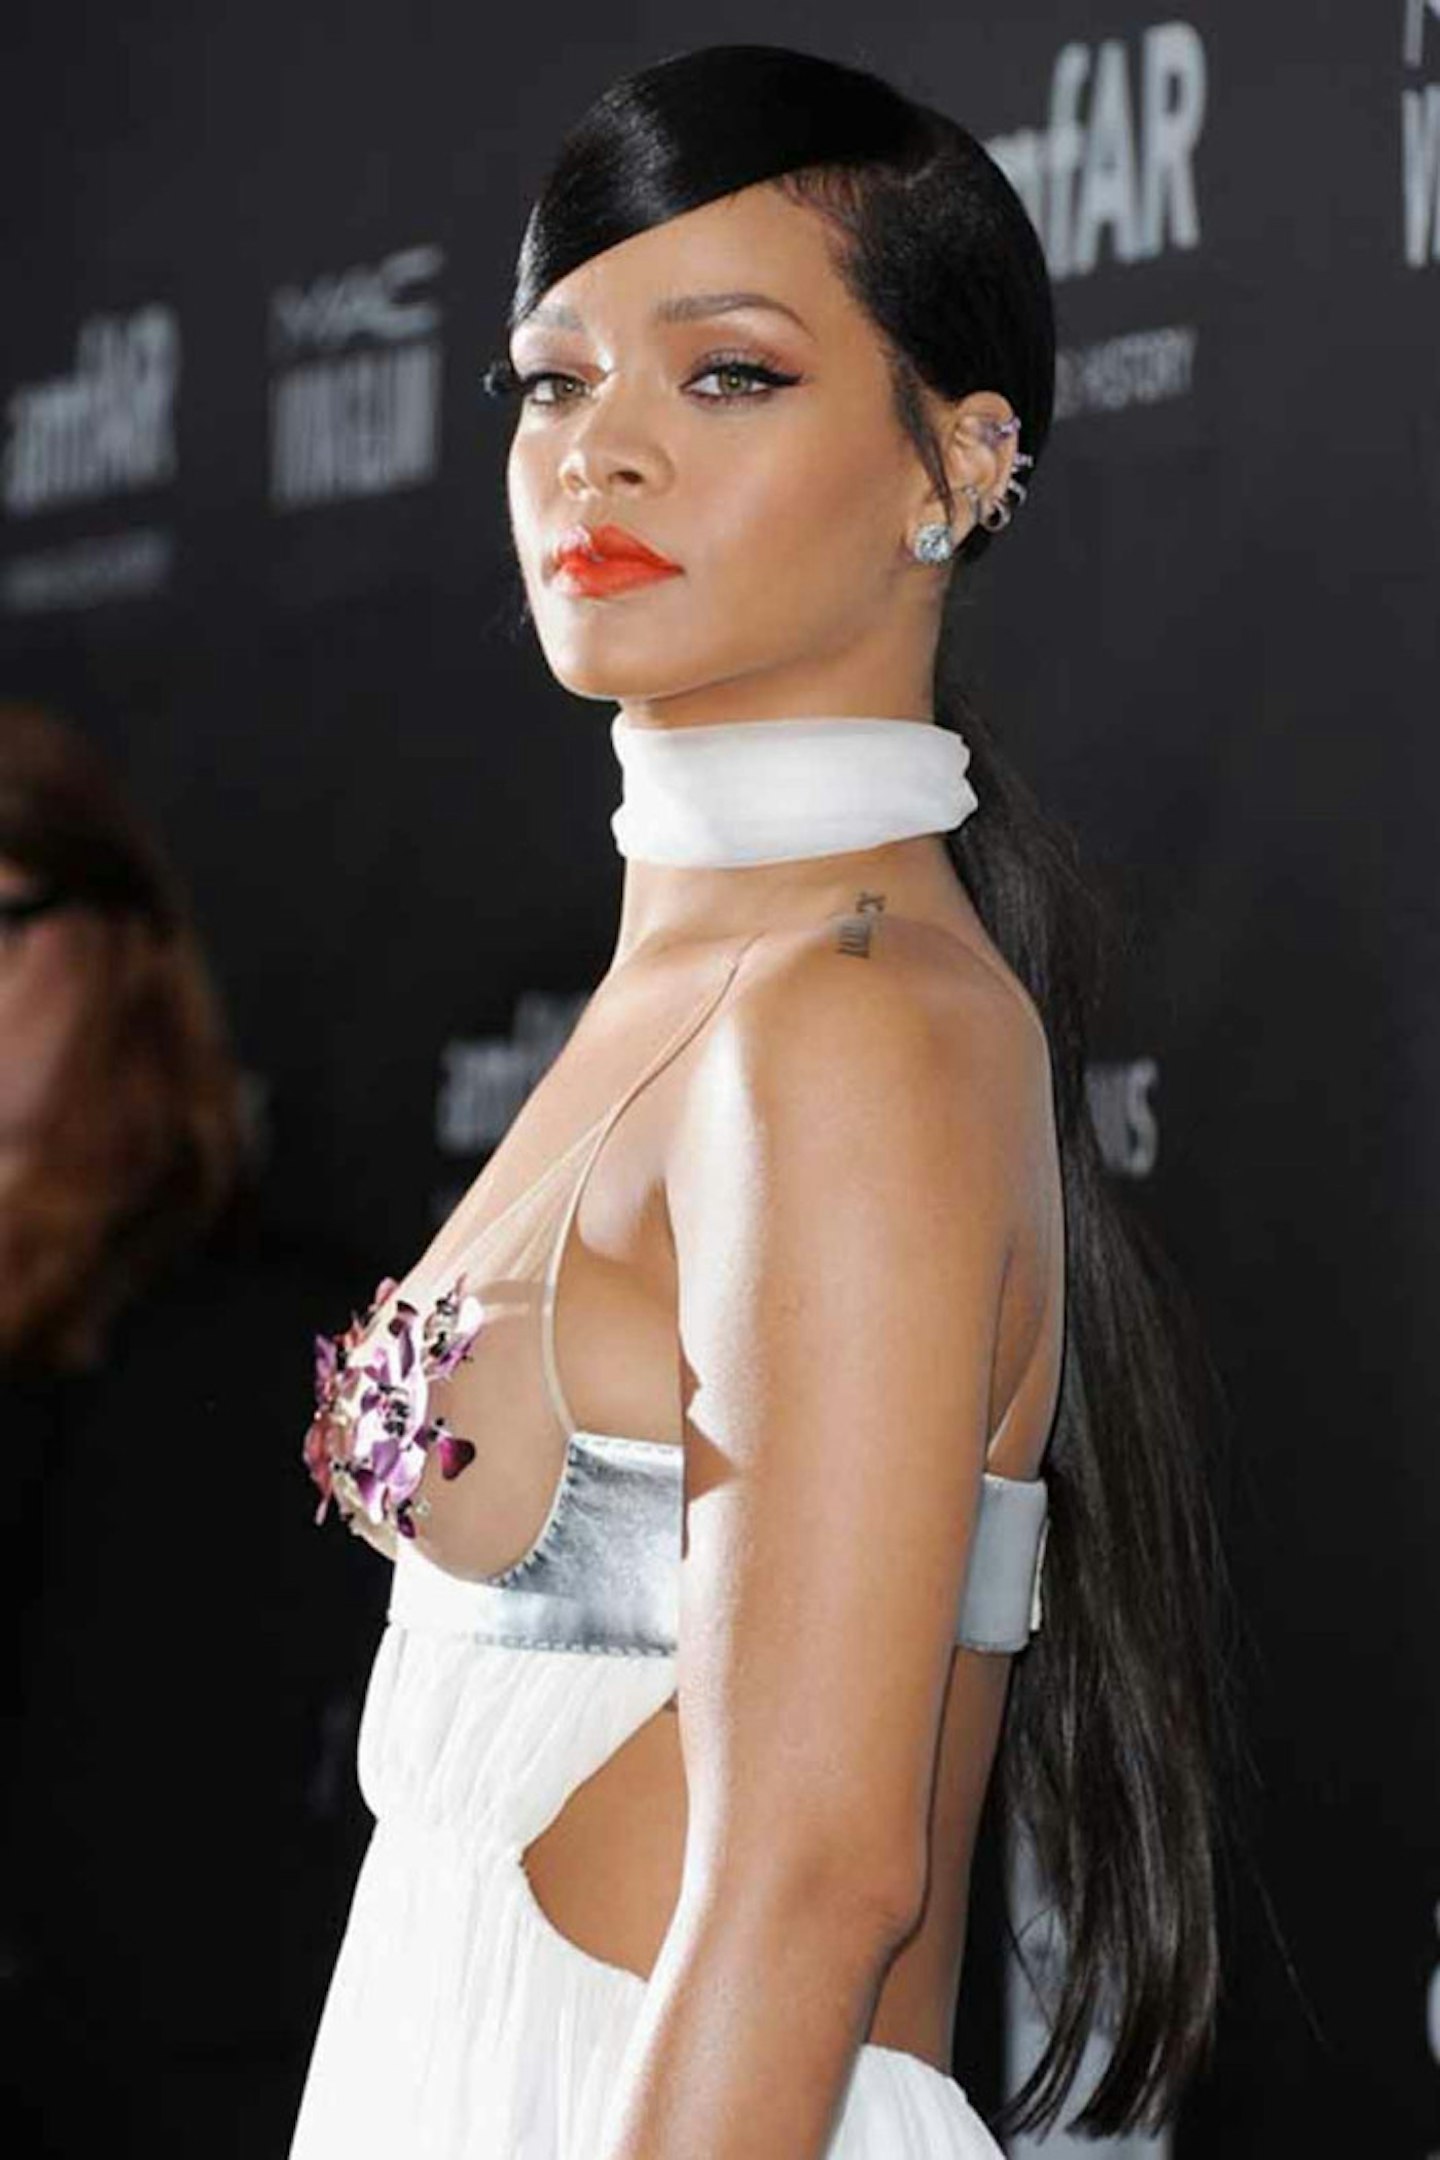 From Miley Cyrus' bondage outfit to Rihanna's nipple pasties: Who wore what  at the amfAR Inspiration Gala, The Independent